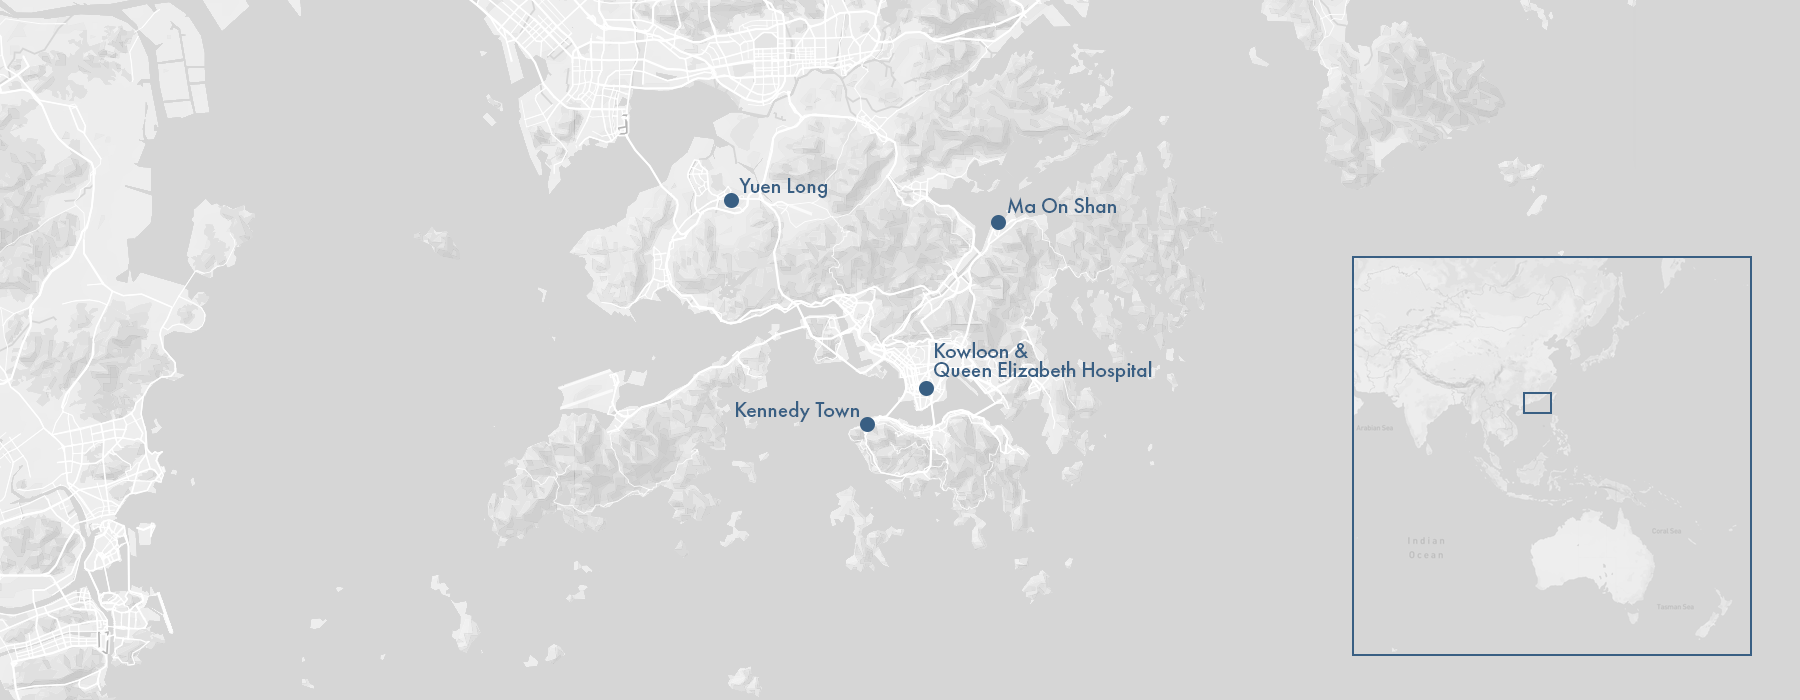 Map pinpointing events in the 1997 Hong Kong avian flu outbreak